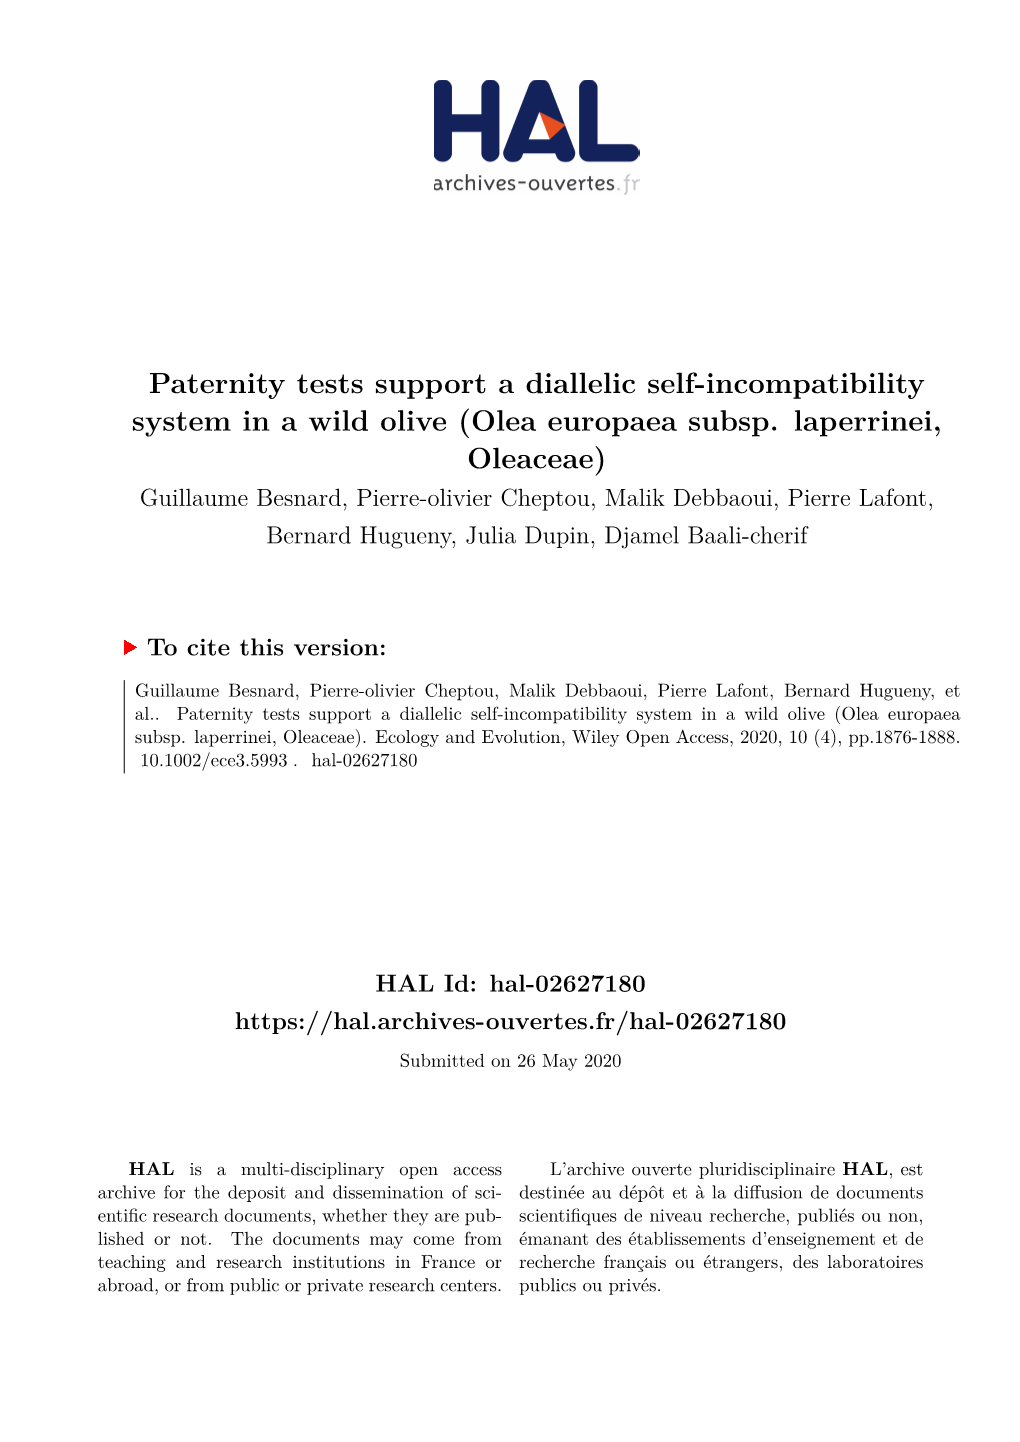 Paternity Tests Support a Diallelic Self-Incompatibility System in a Wild Olive (Olea Europaea Subsp. Laperrinei, Oleaceae)